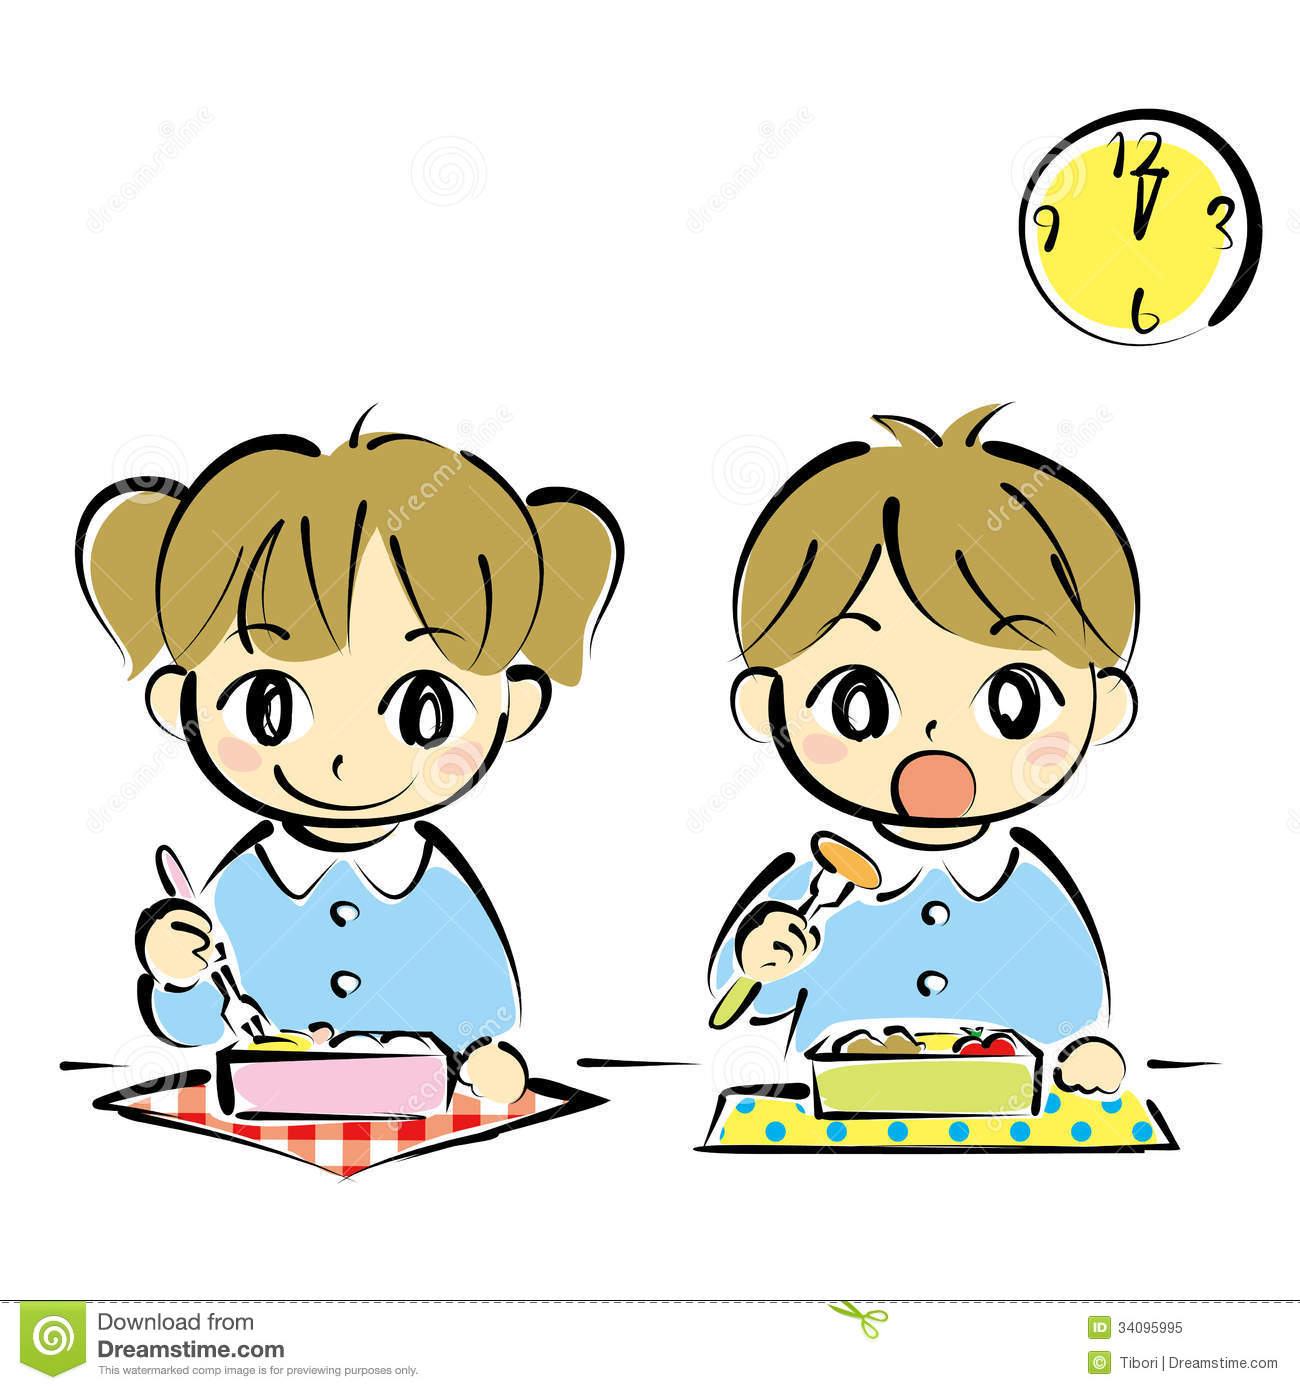 Kids At Lunchtime Royalty Free Stock Photo   Image  34095995